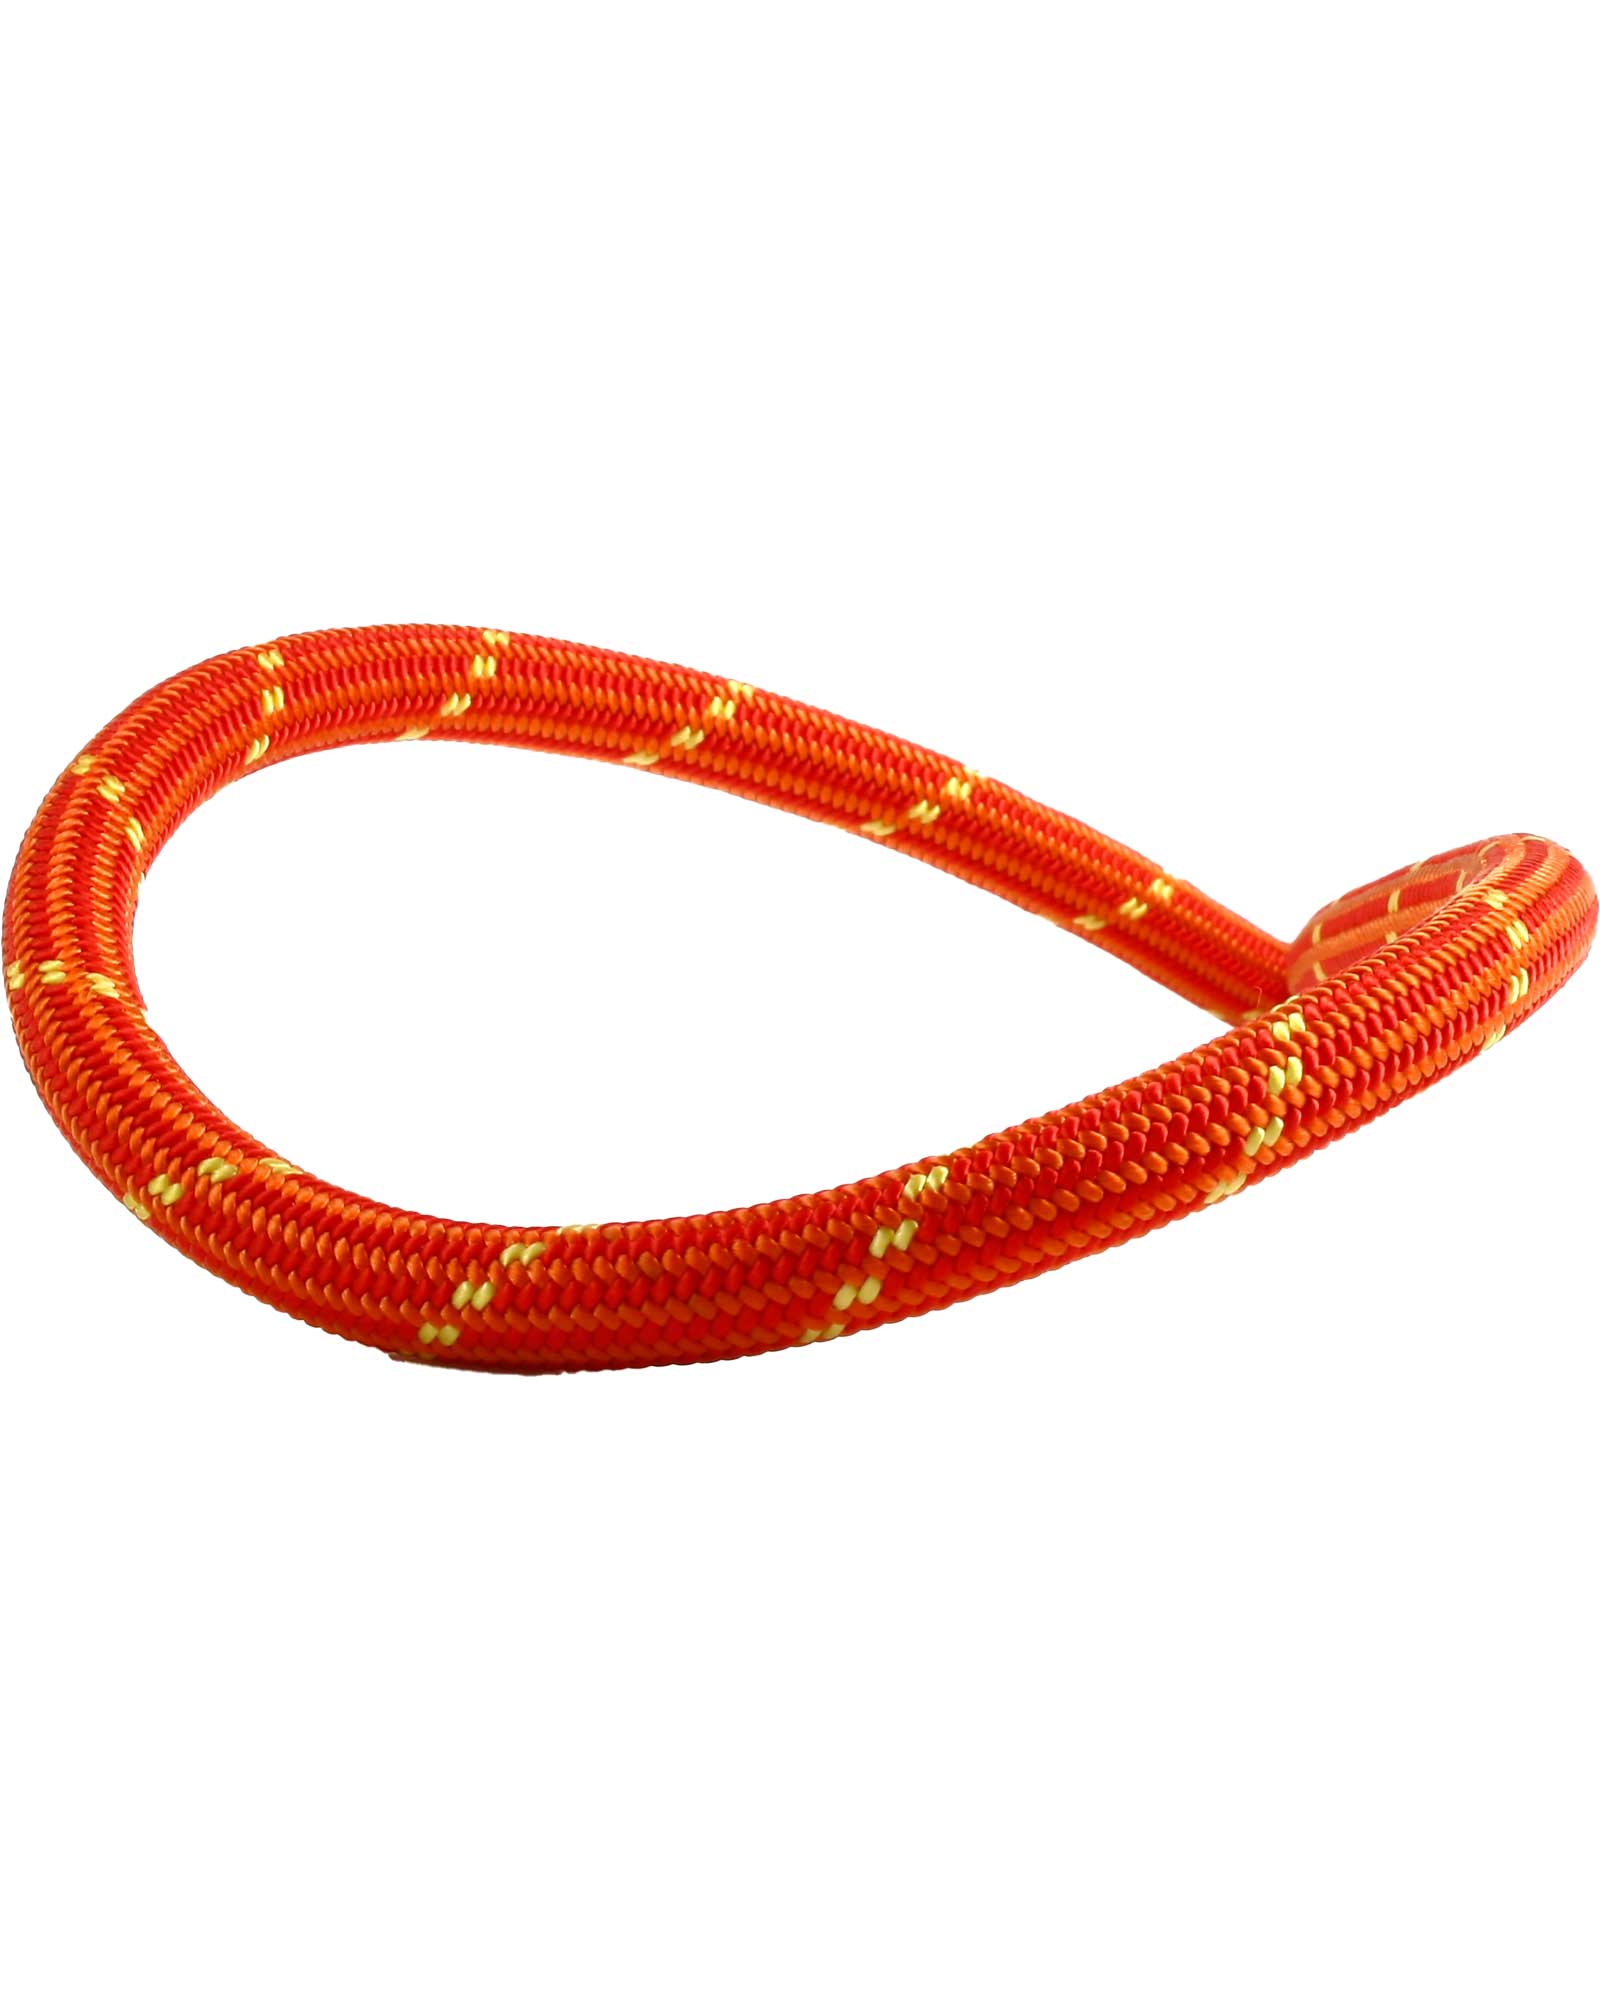 Edelweiss Energy 9.5mm x 60m Rope 0